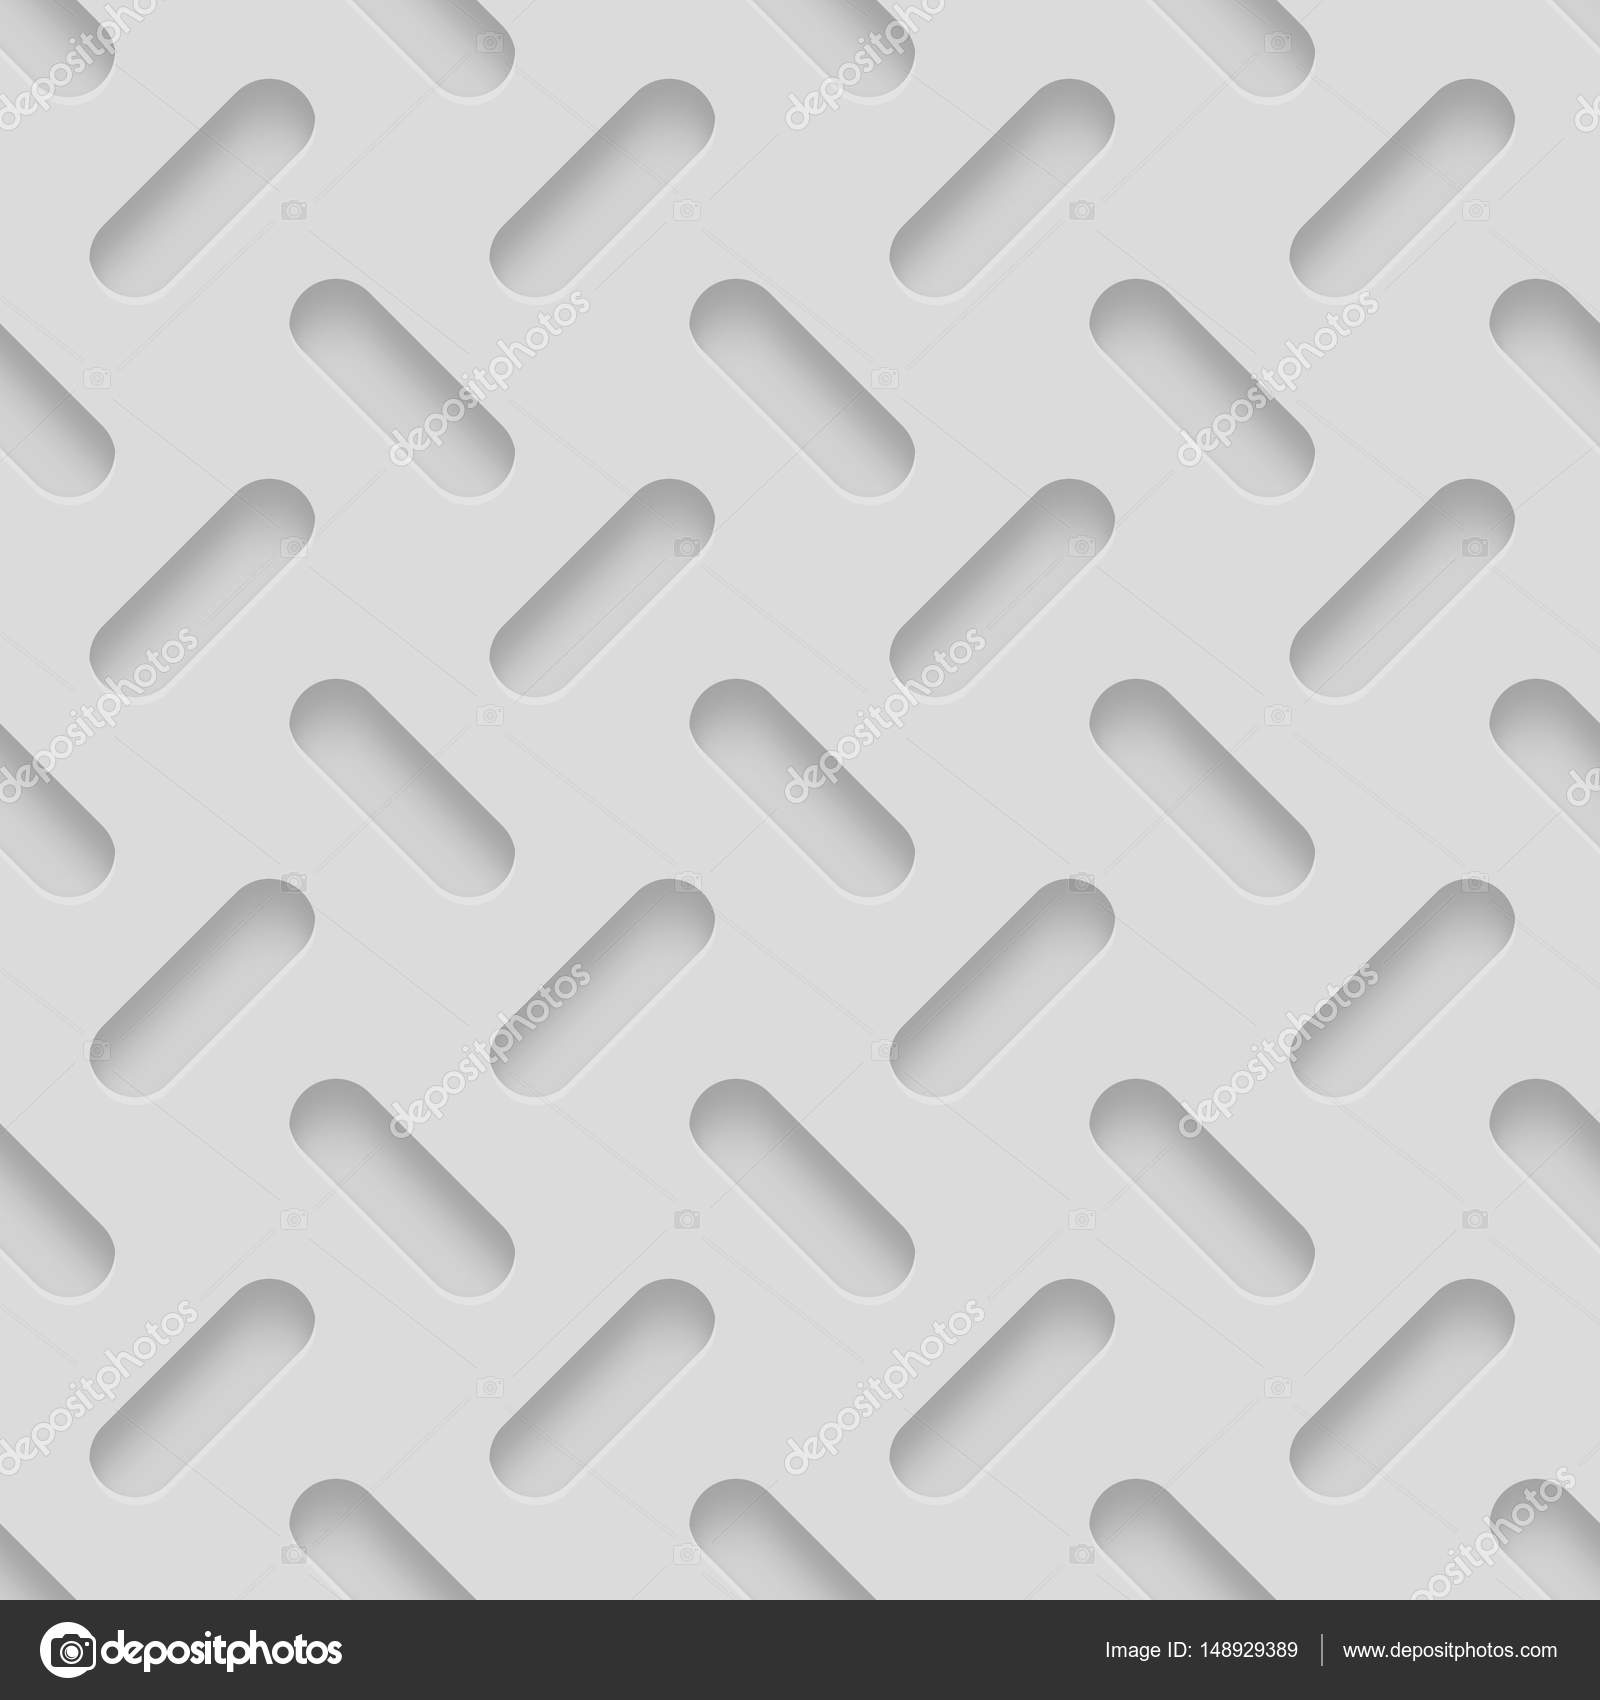 Seamless Patterns With Beveled Shapes. Abstract Grayscale Monochrome ...